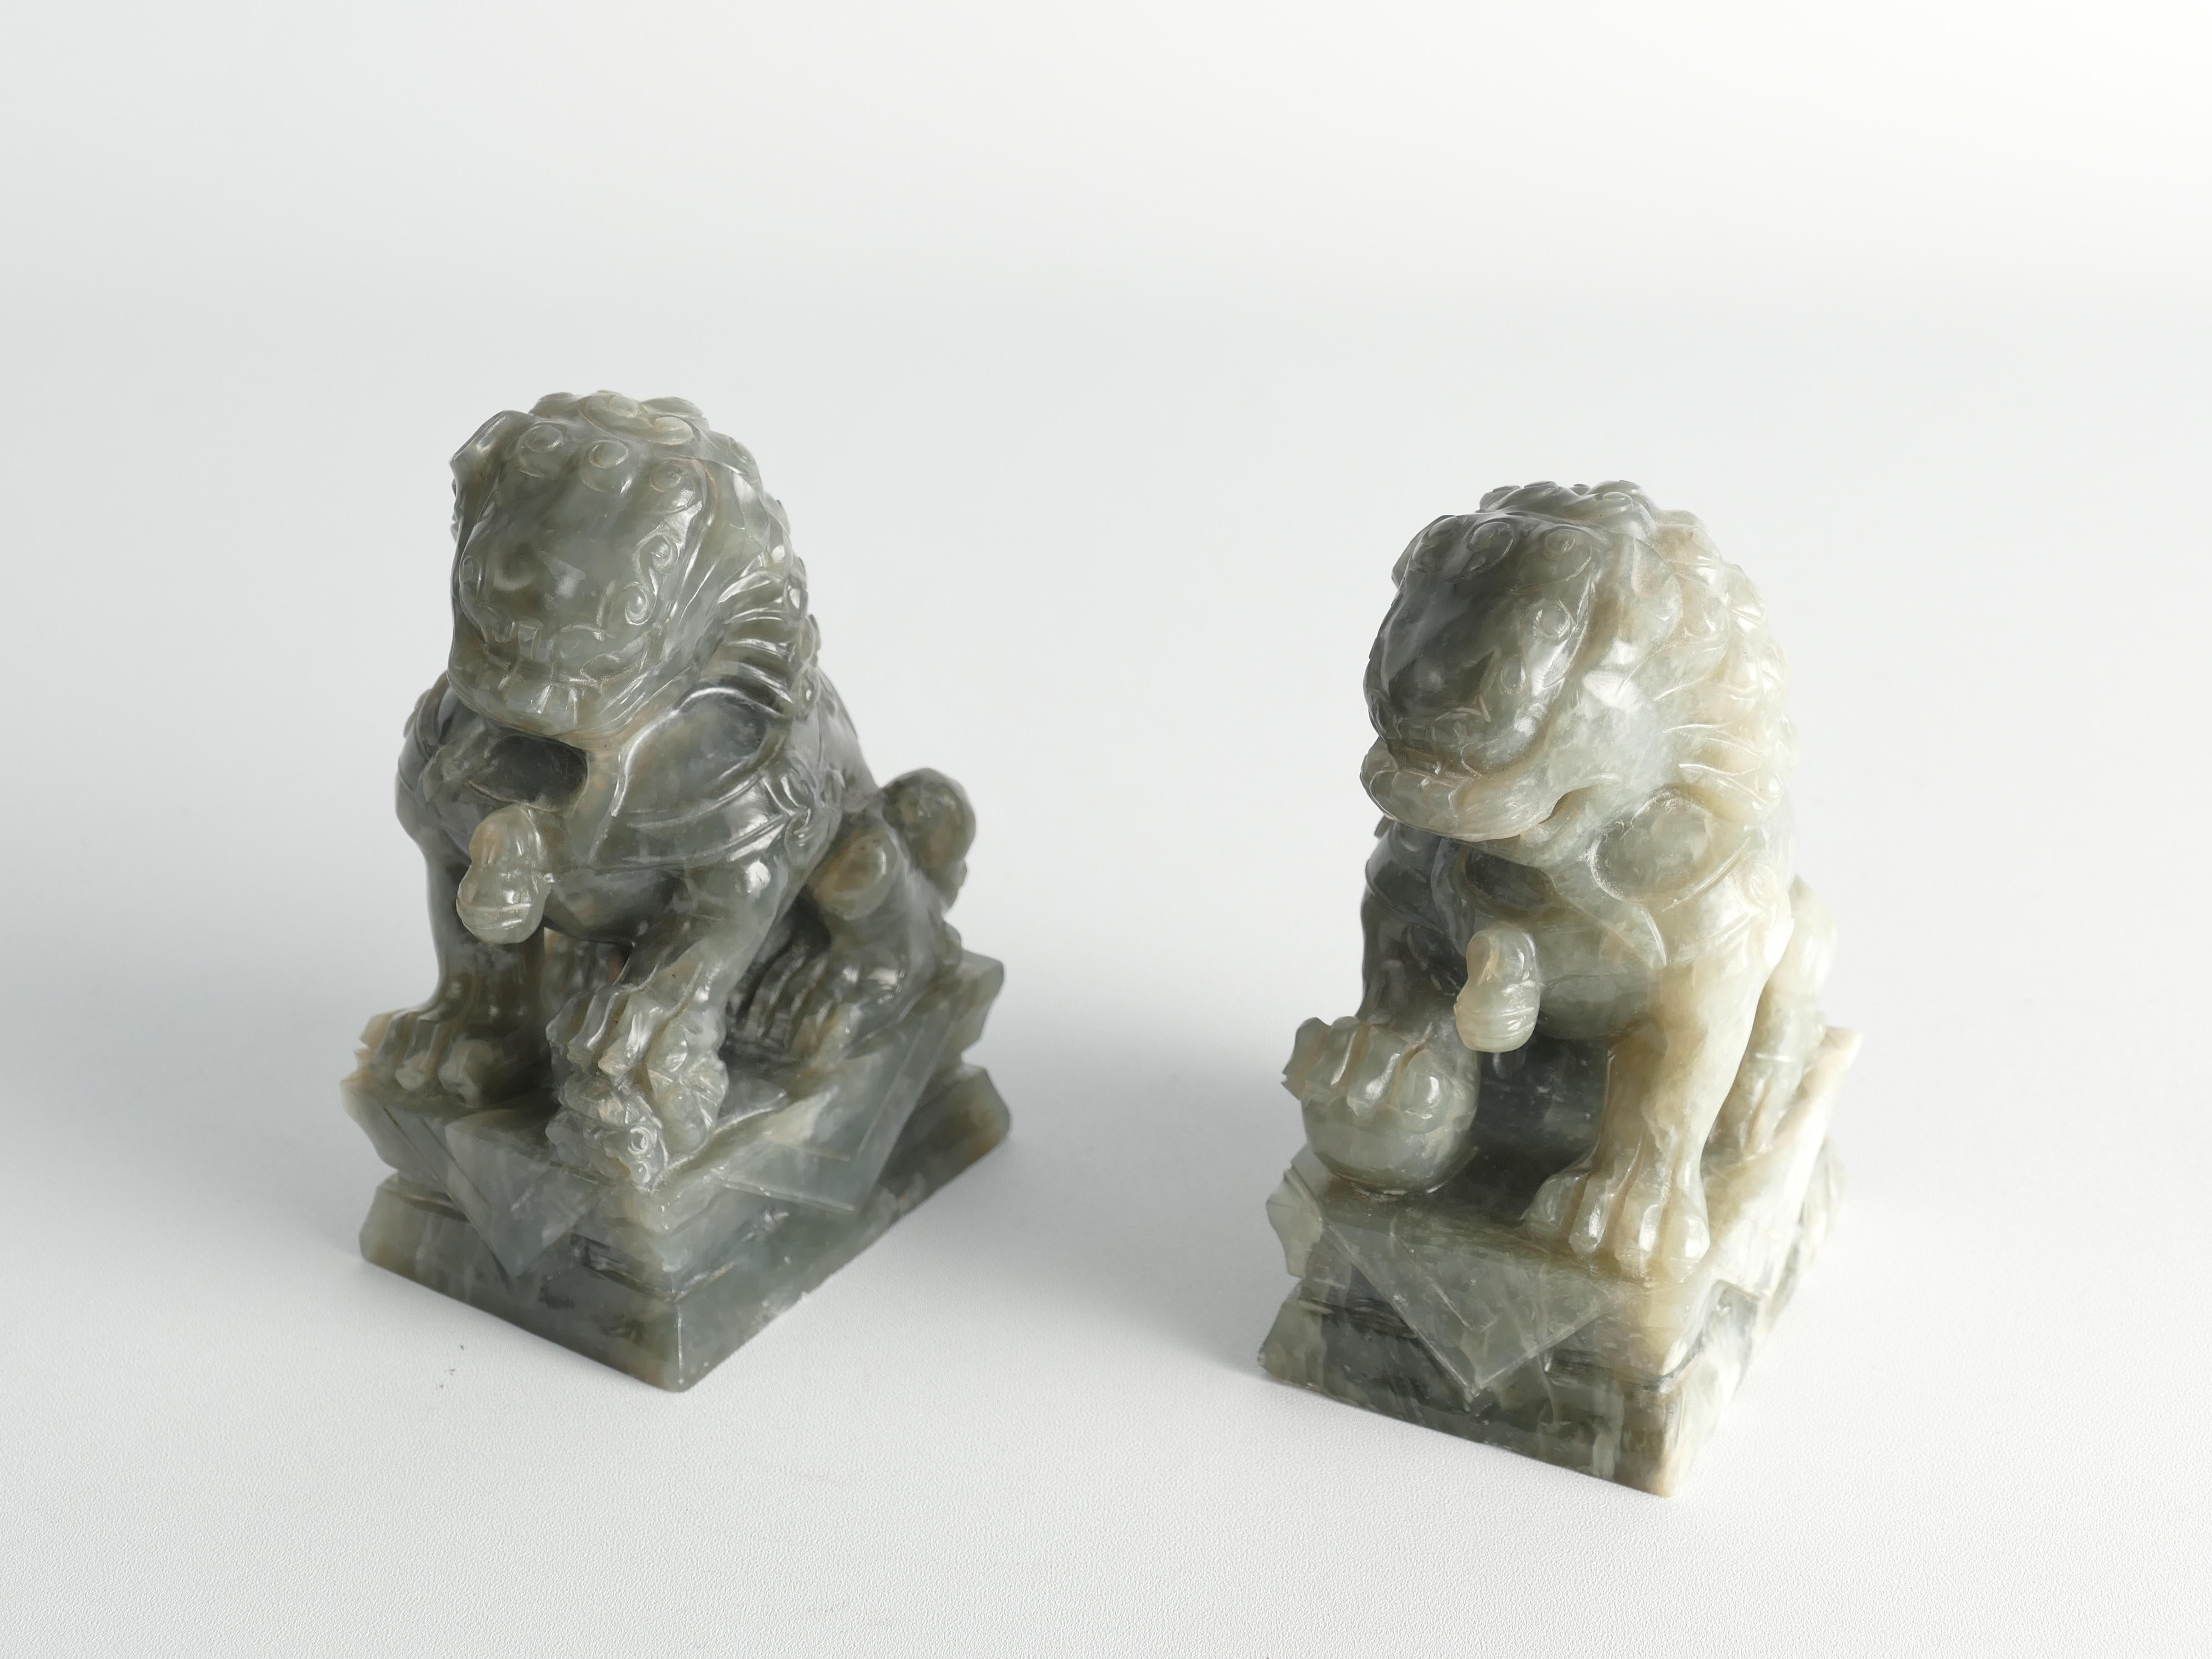 Chinese Jade Foo Dogs. The jade, or stone resembling its pale green hue,  beutifully exhibits shades that span from milky white to pale jade green.
The Foo Dogs possess a playful, lively appearance, each perched on its individual squared base. The